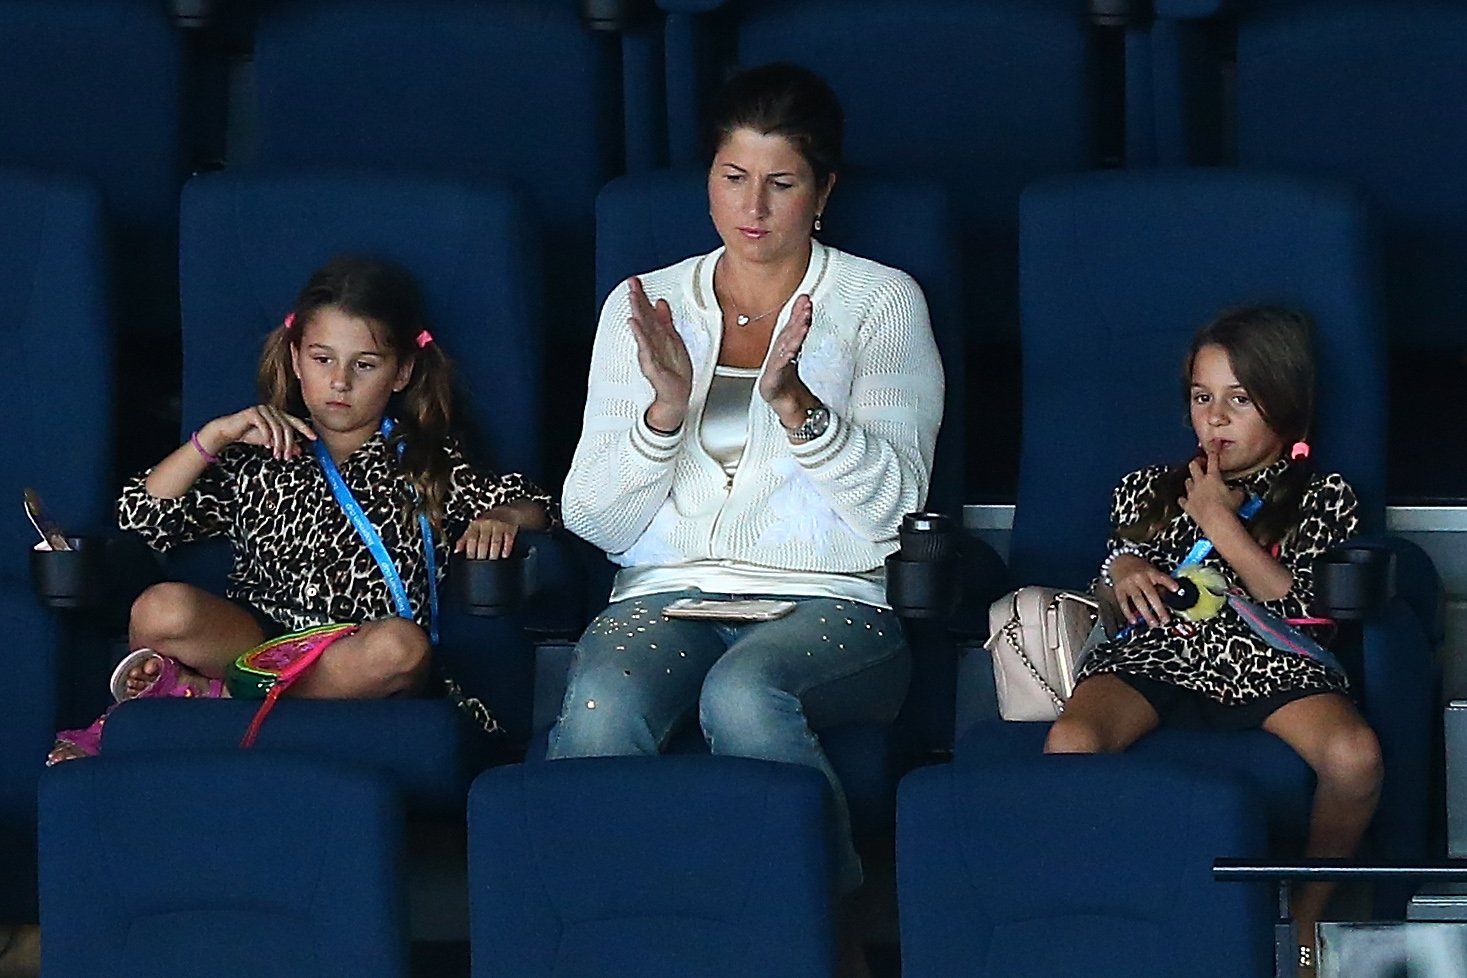 Mirka Federer together with her twin daughters Myla Rose and Charlene Riva watch a match between Roger Federer of Switzerland and Alexander Zverev of Germany in the 2017 Hopman Cup on January 4, 2017, in Perth, Australia. | Source: Getty Images